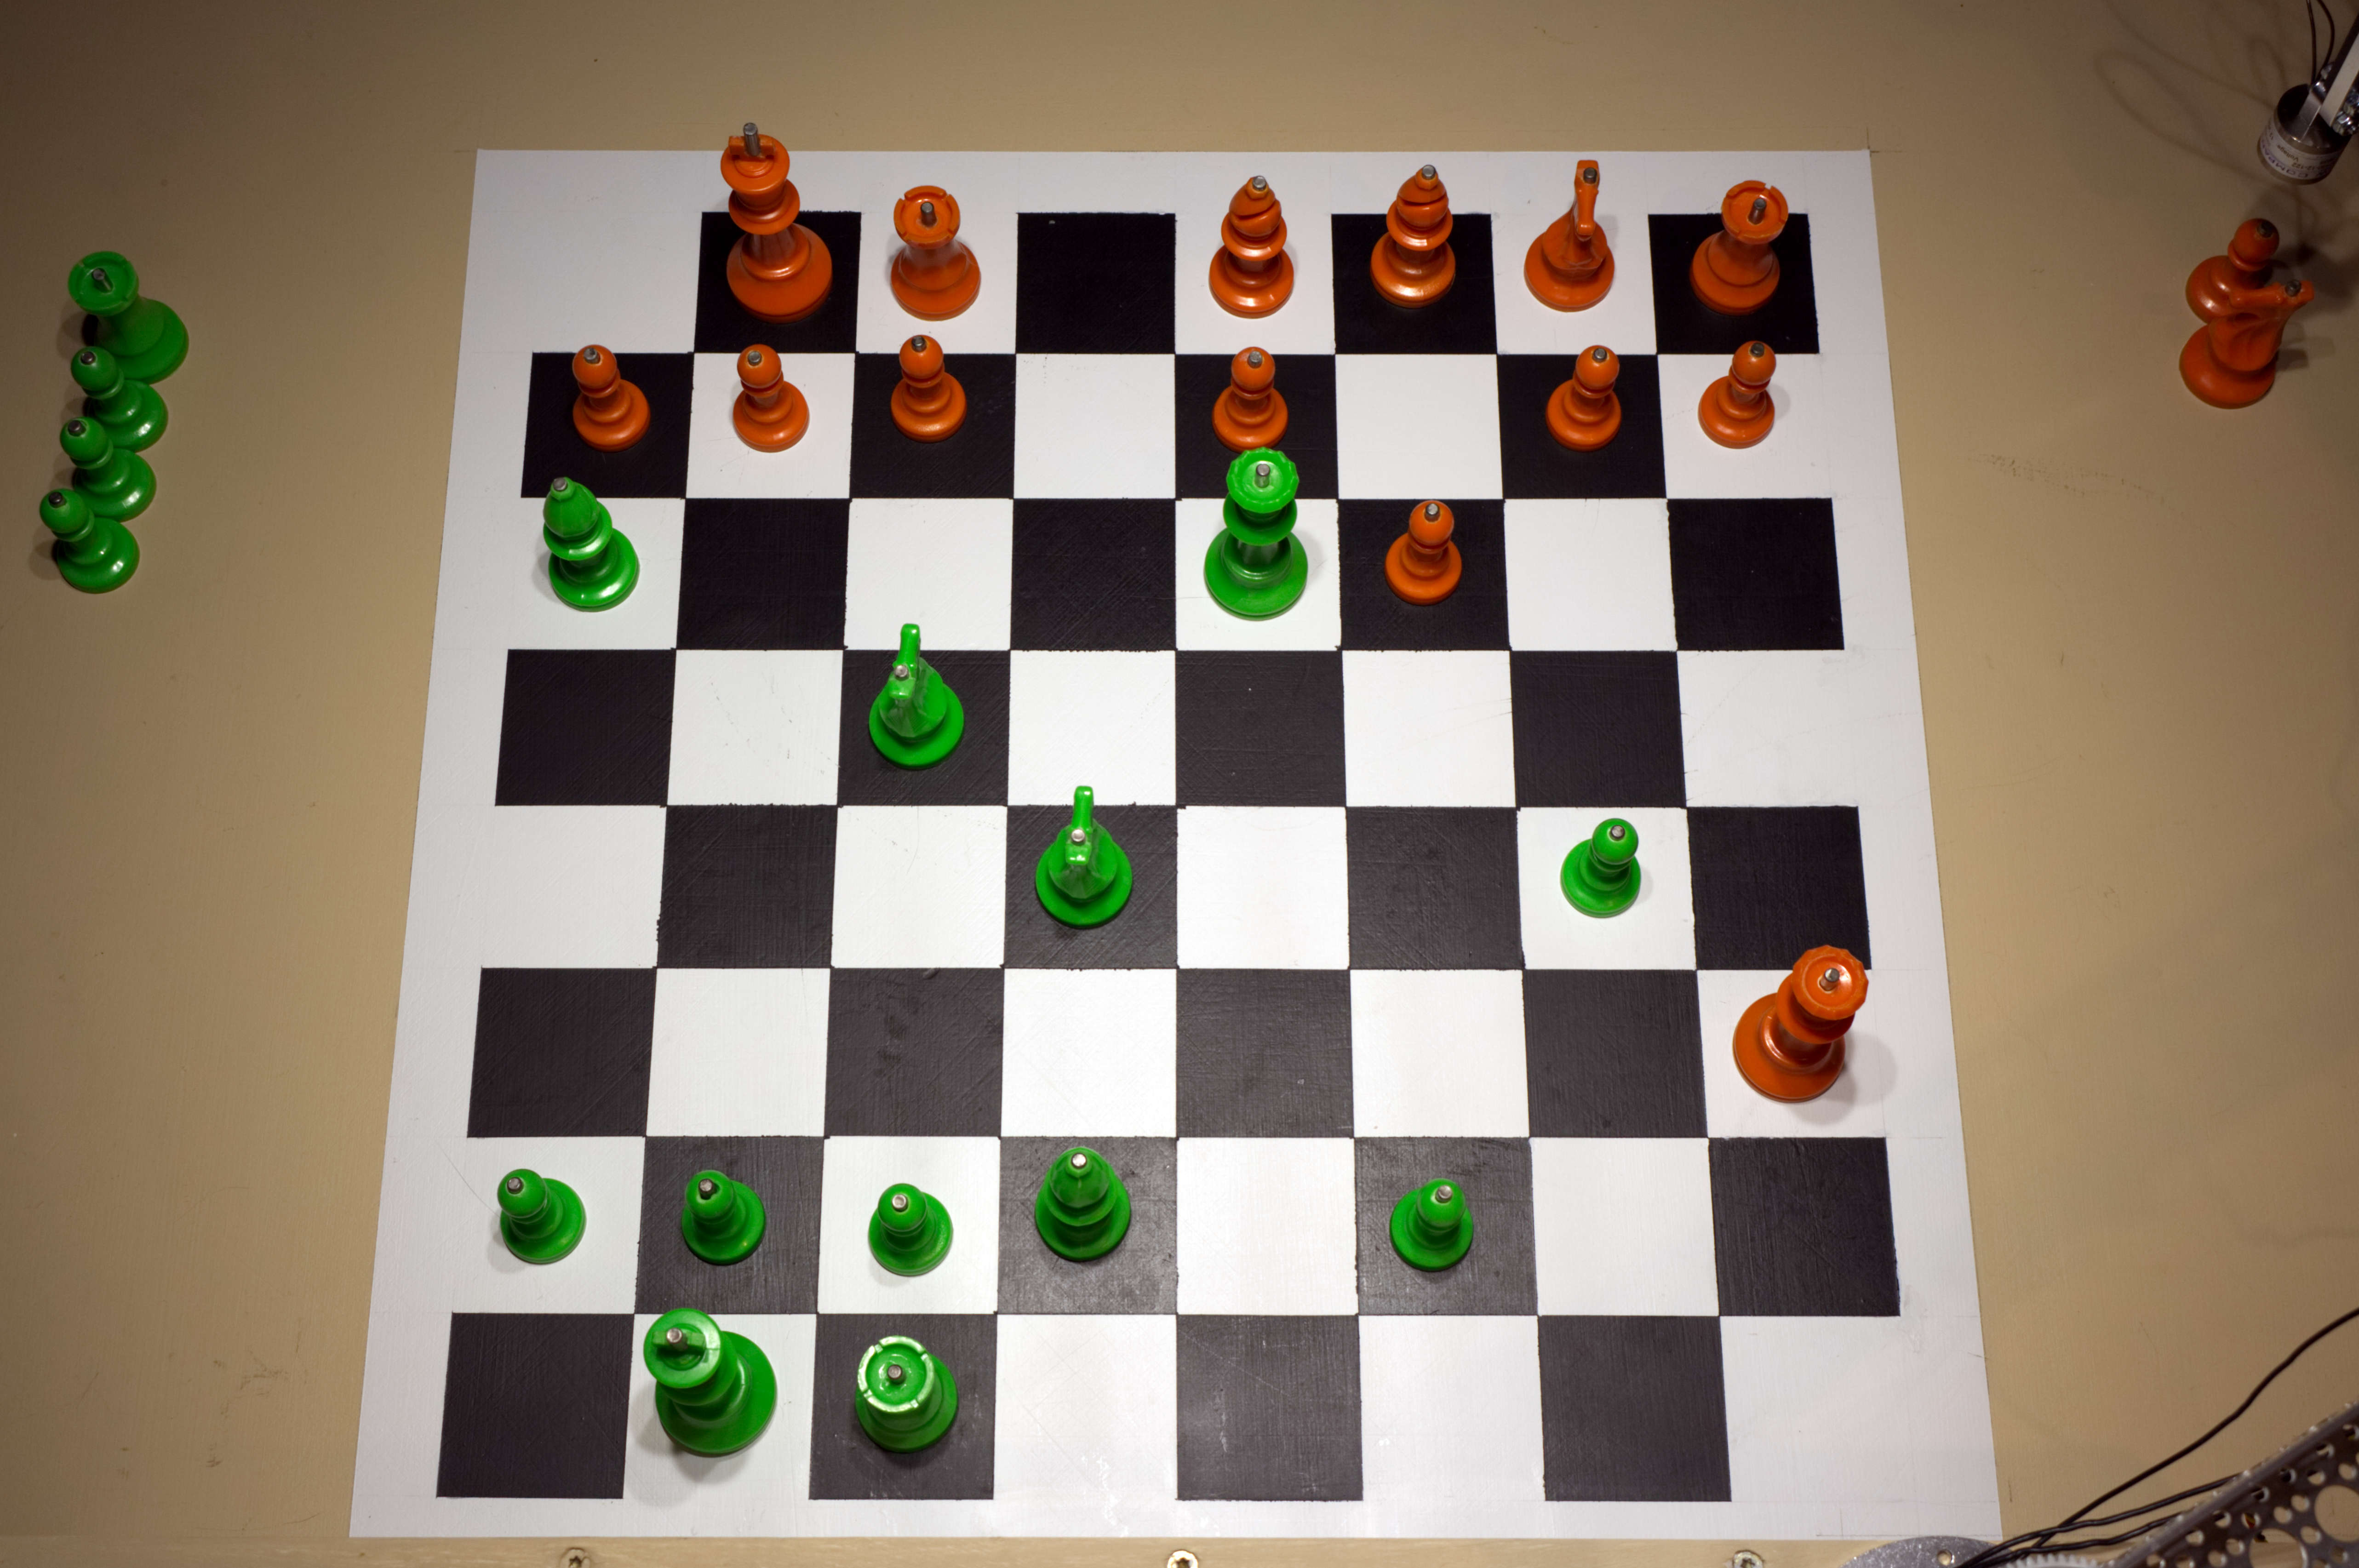 The chessboard from the perspective of the Raspberry Turk's side.